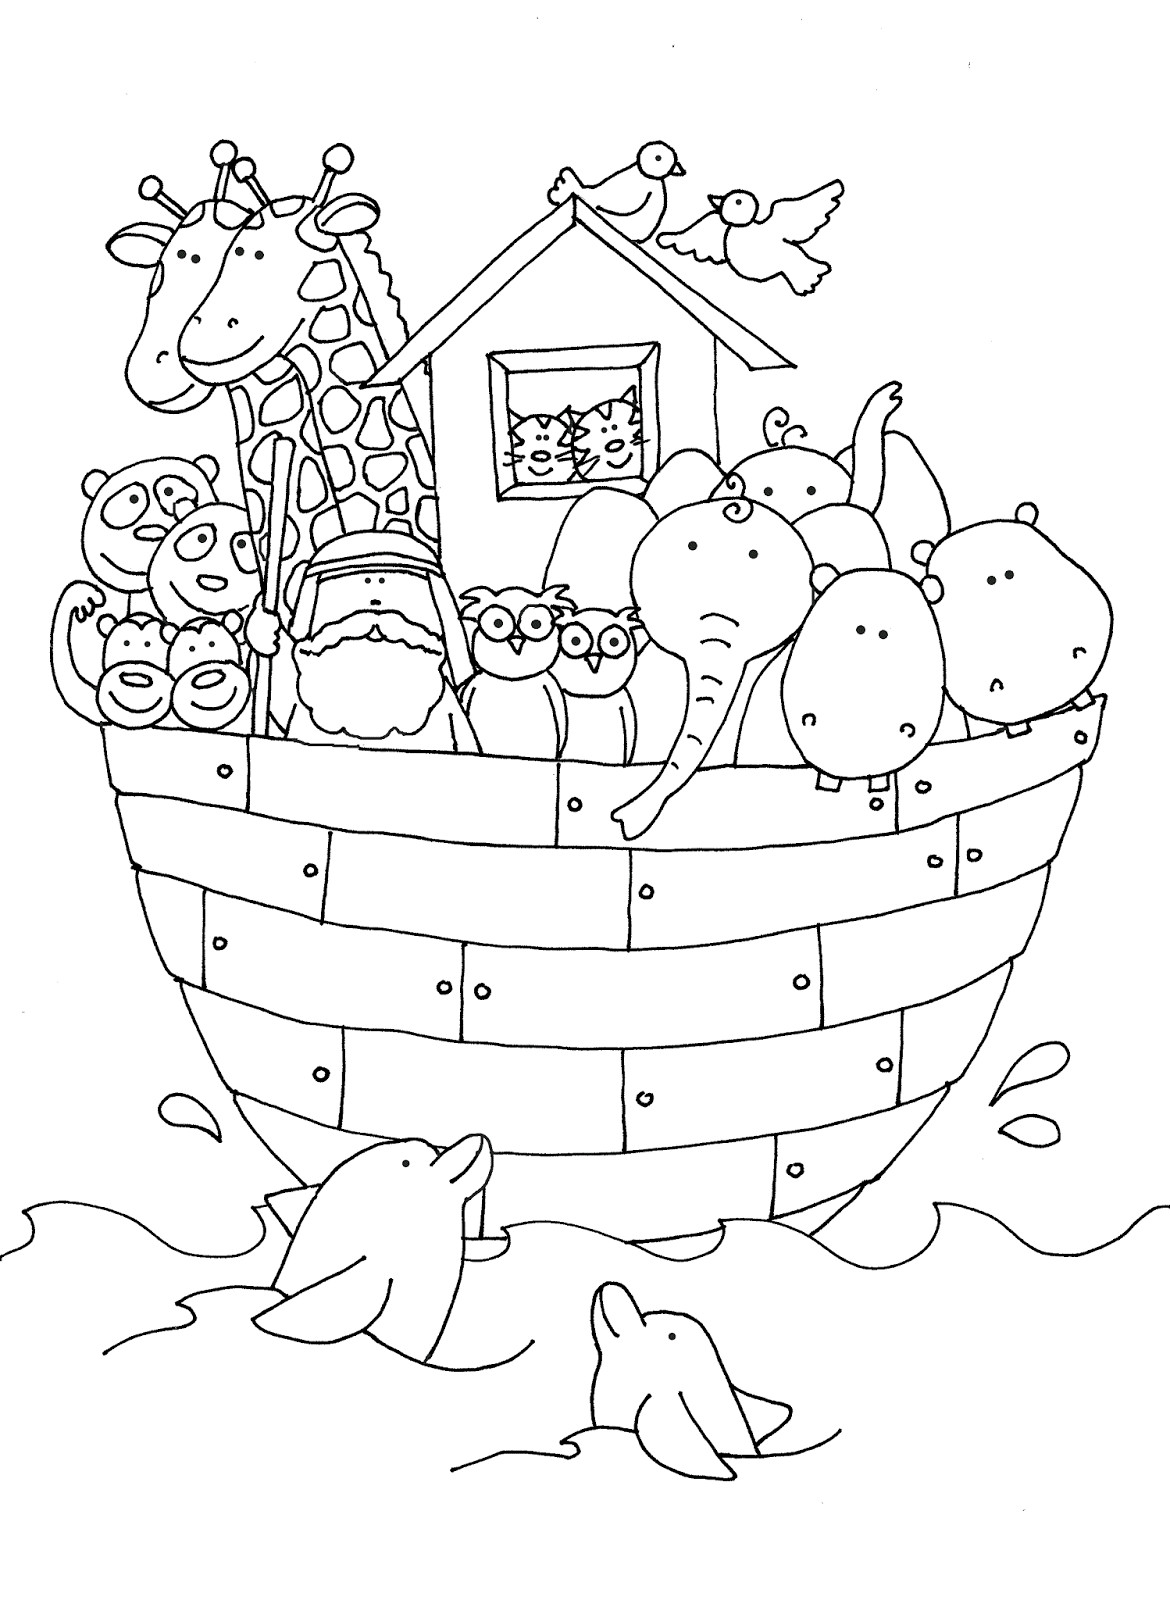 Printable Noah'S Ark Coloring Pages
 Free Dearie Dolls Digi Stamps As requested Noah s Ark